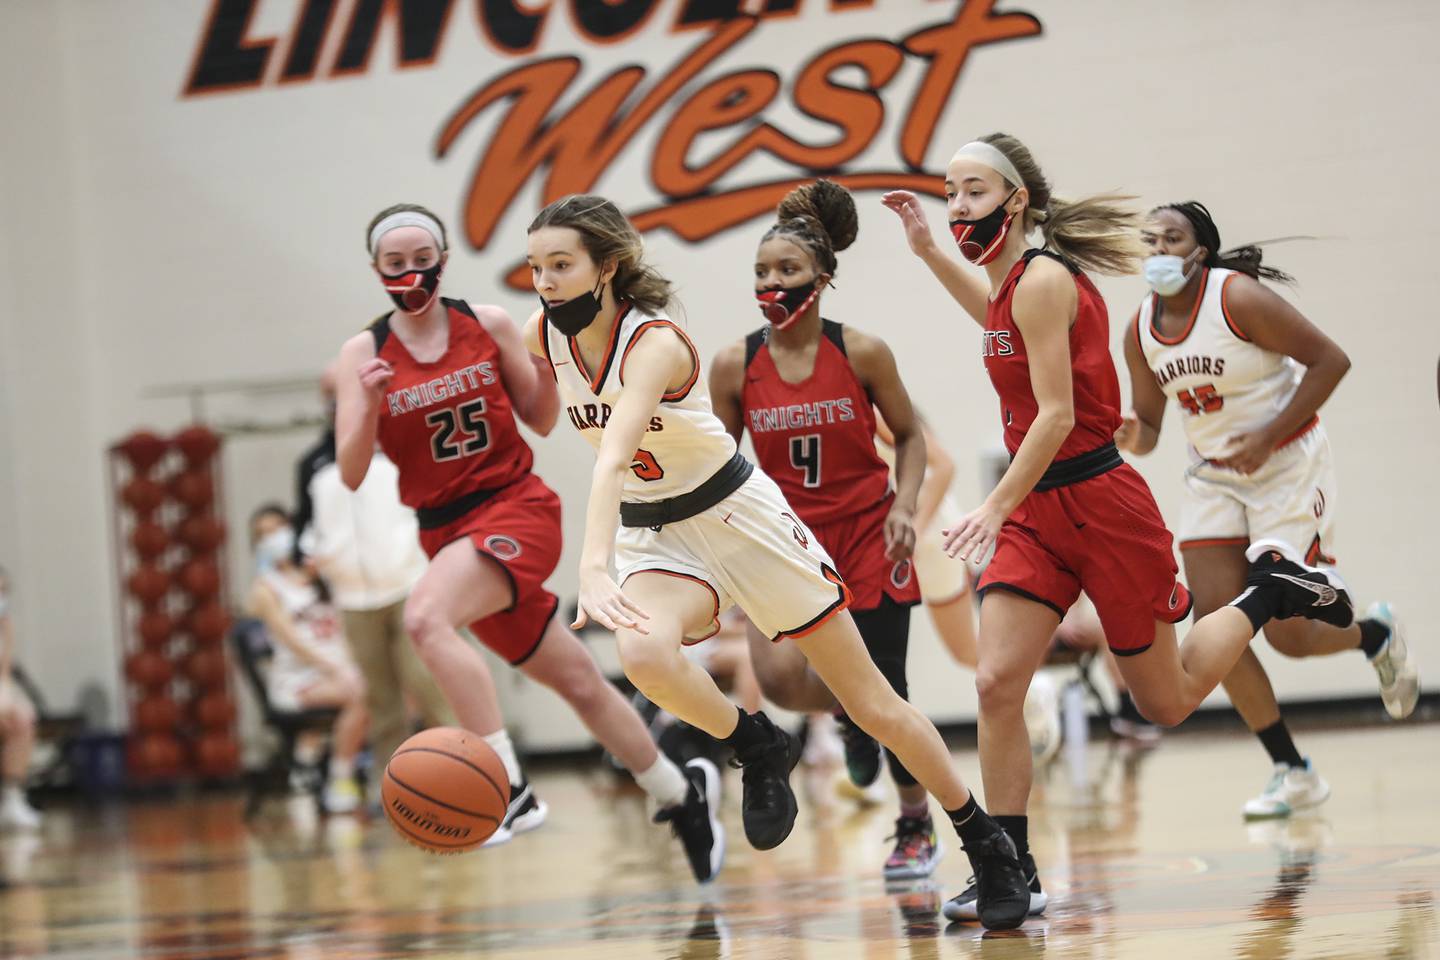 Lincoln-Way West's Ava Gugliuzza dribbles during a fast break.